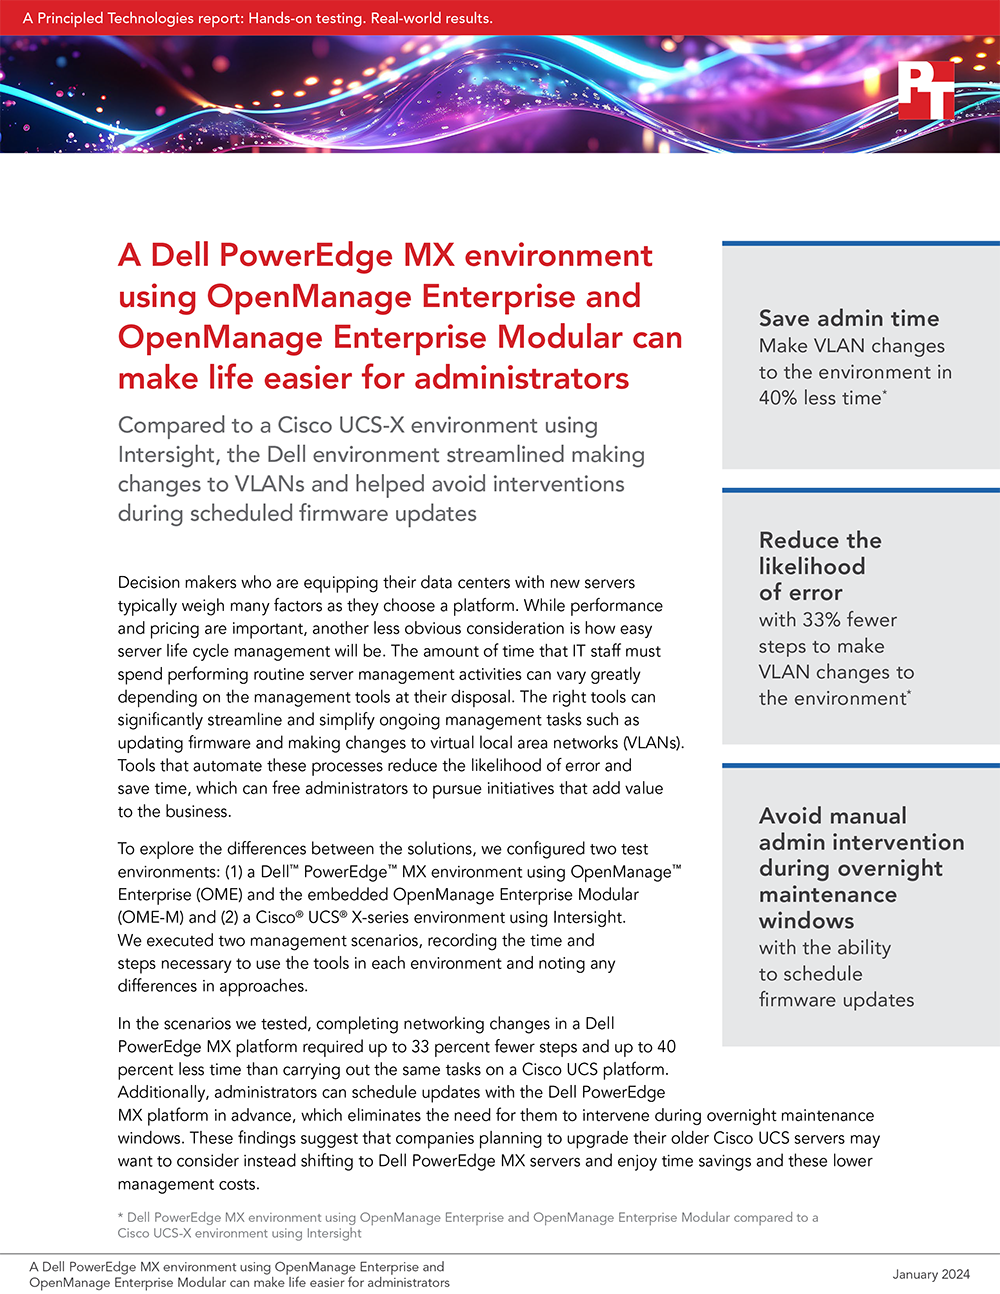 New Principled Technologies Report Highlights Manageability Benefits of a Dell PowerEdge MX Server Environment with OpenManage Enterprise & OpenManage Enterprise Modular